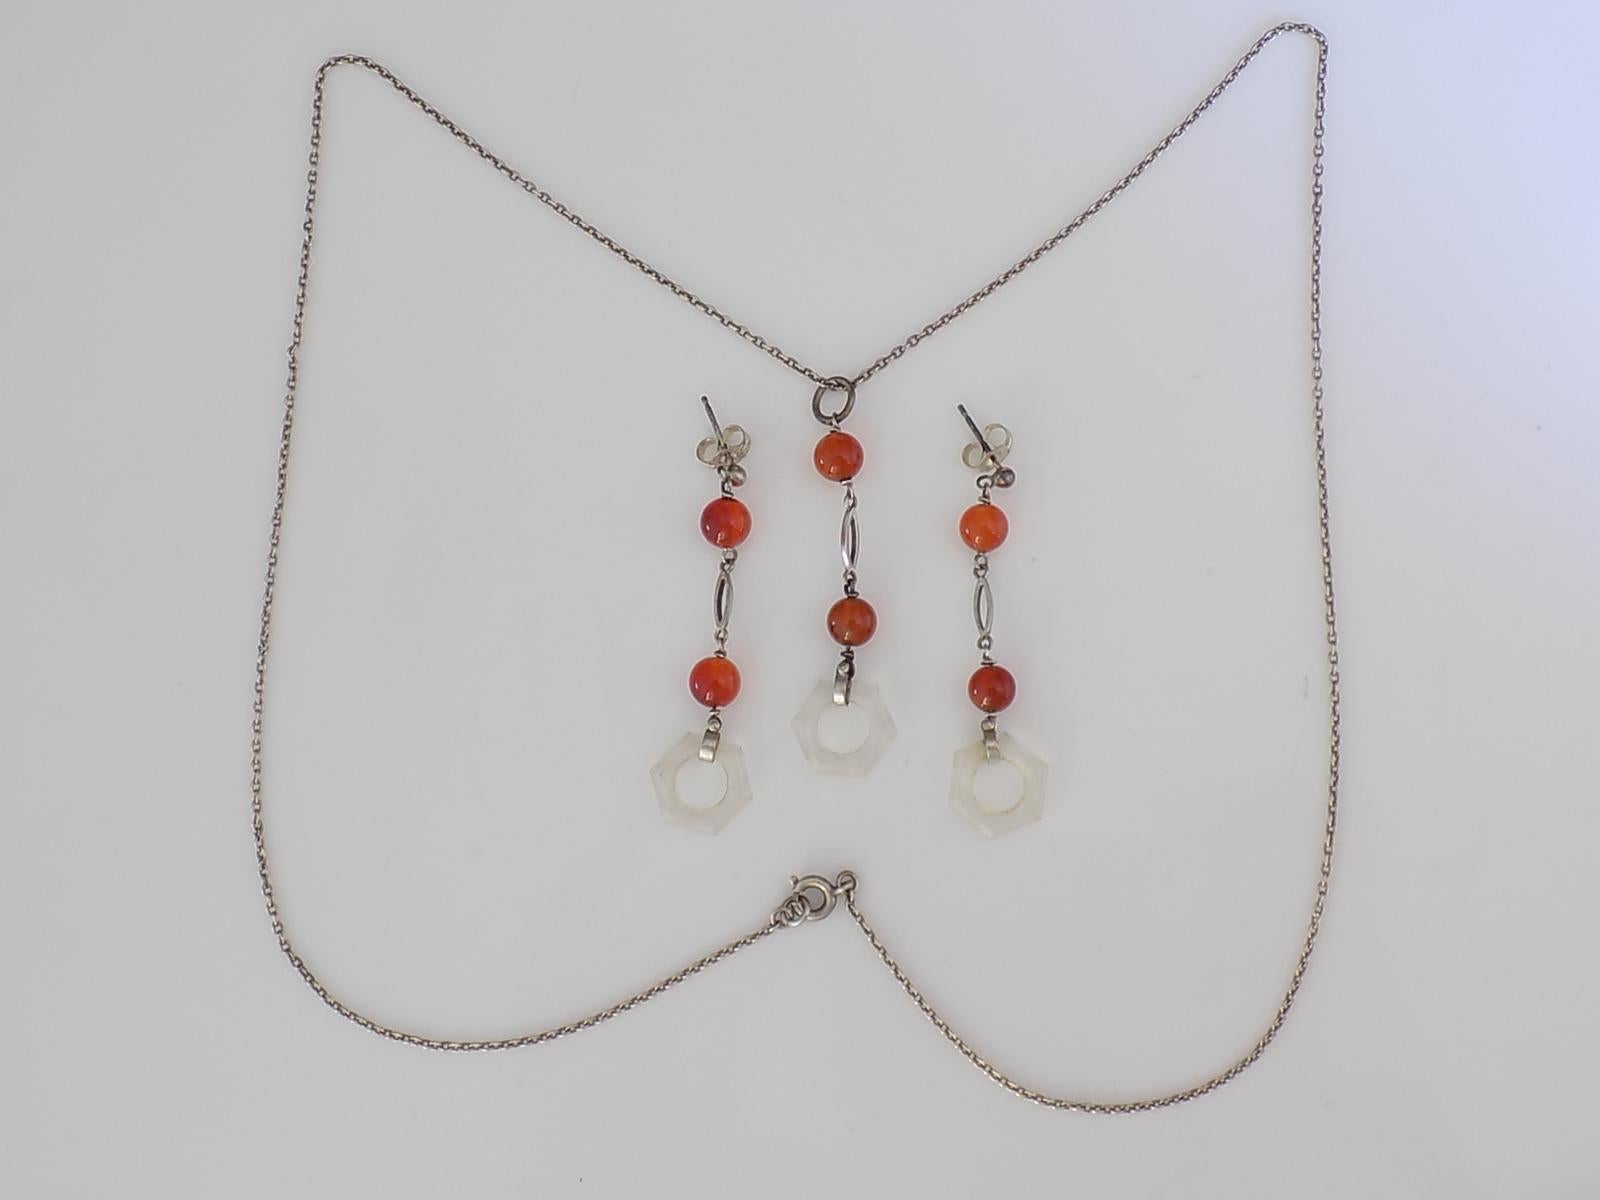 A Lovely Art Deco c.1930s solid Sterling Silver, Rock Crystal and Carnelian Agate earrings and necklace set.

Drop of earrings 45mm, Width of the crystal 13mm.

Length of the necklace 21